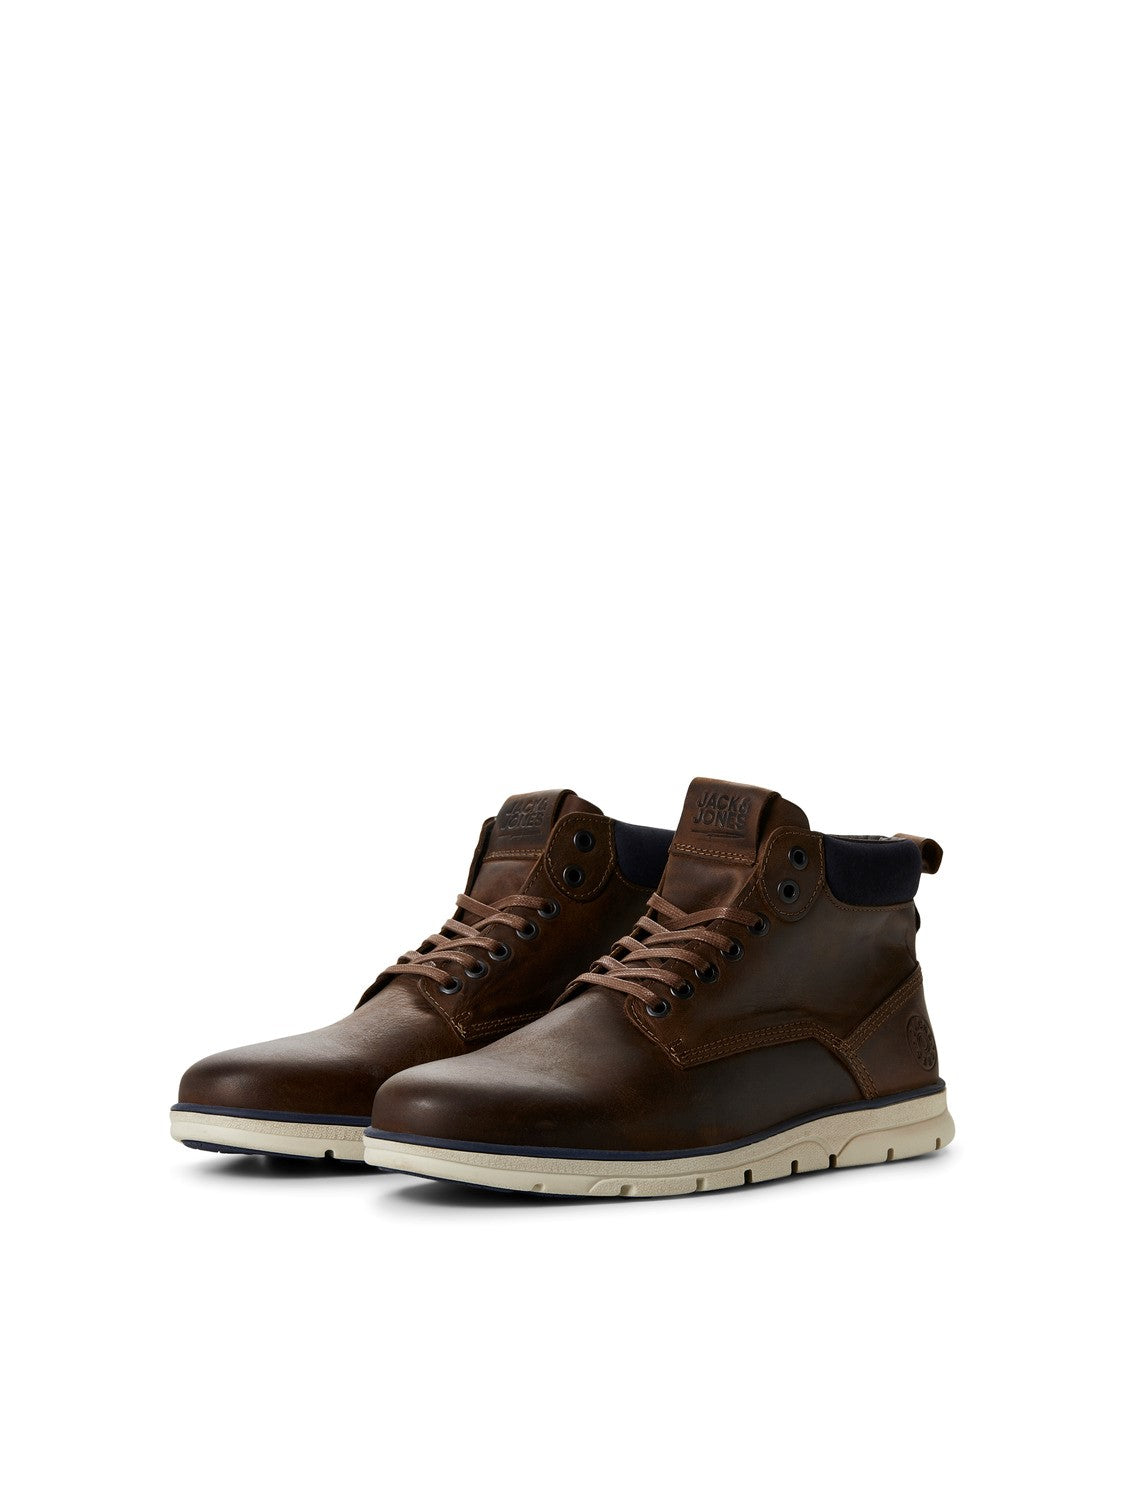 Tubar Leather Brandy Boot side